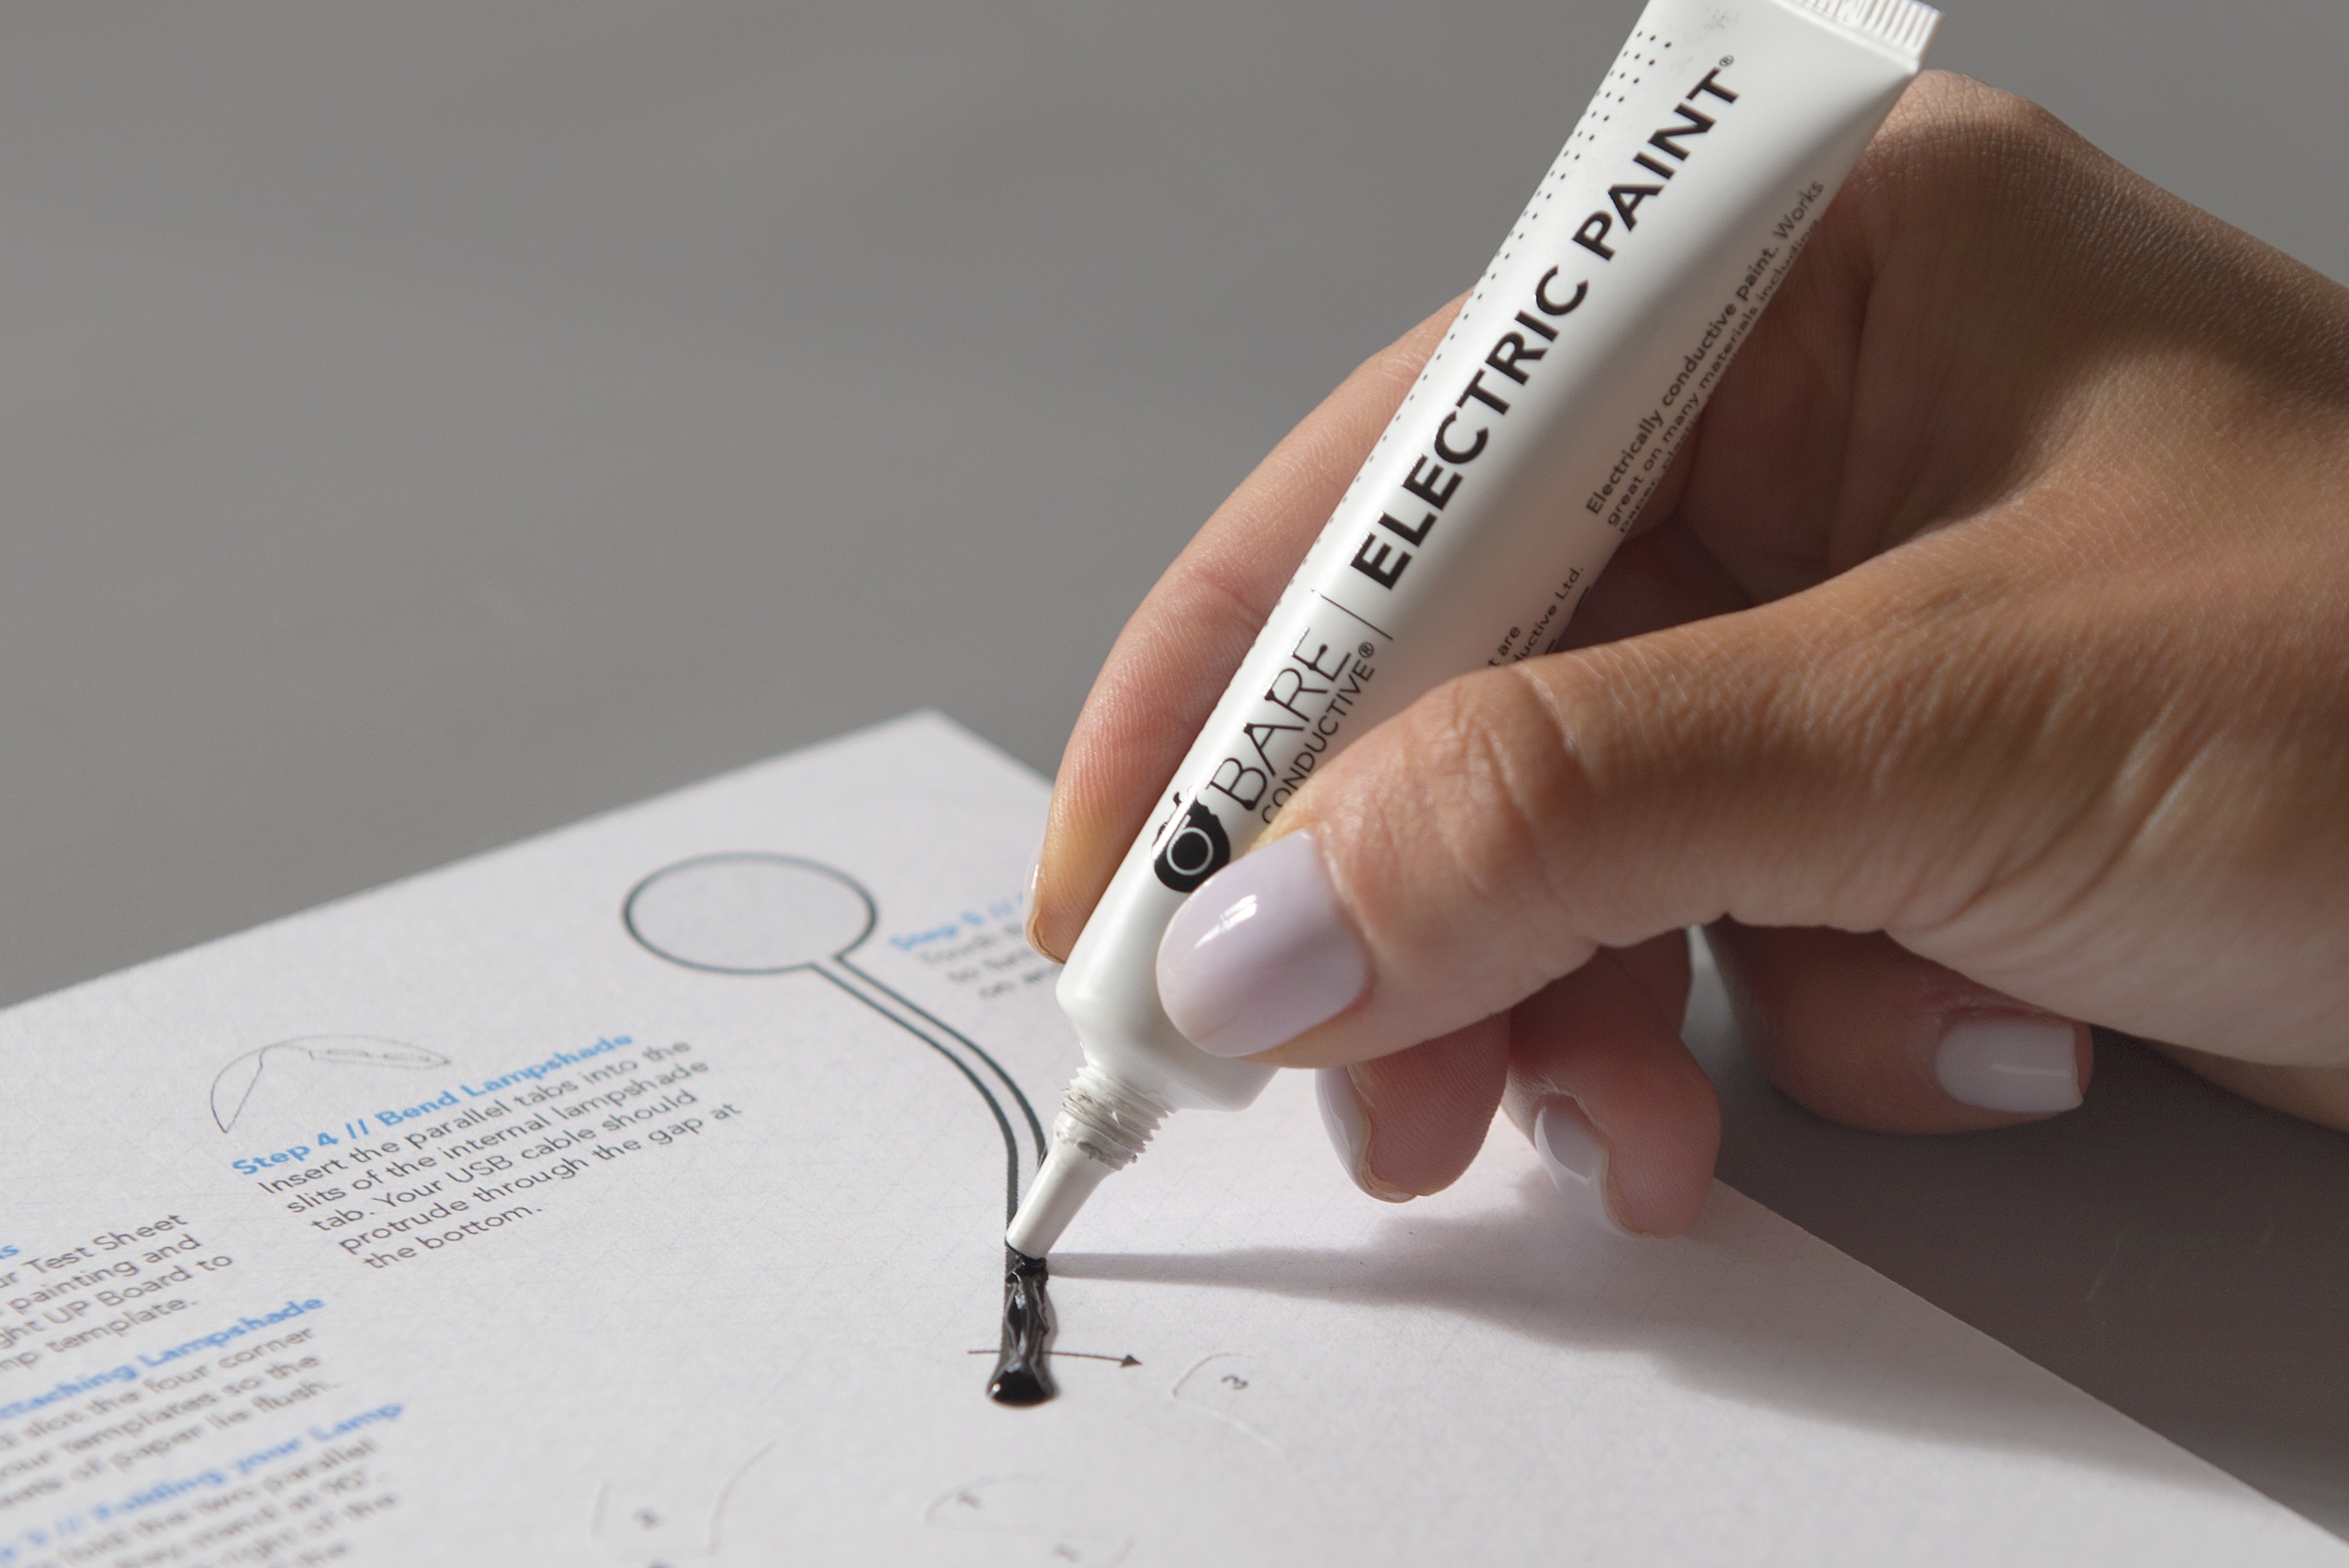 Electric Paint by Bare Conductive